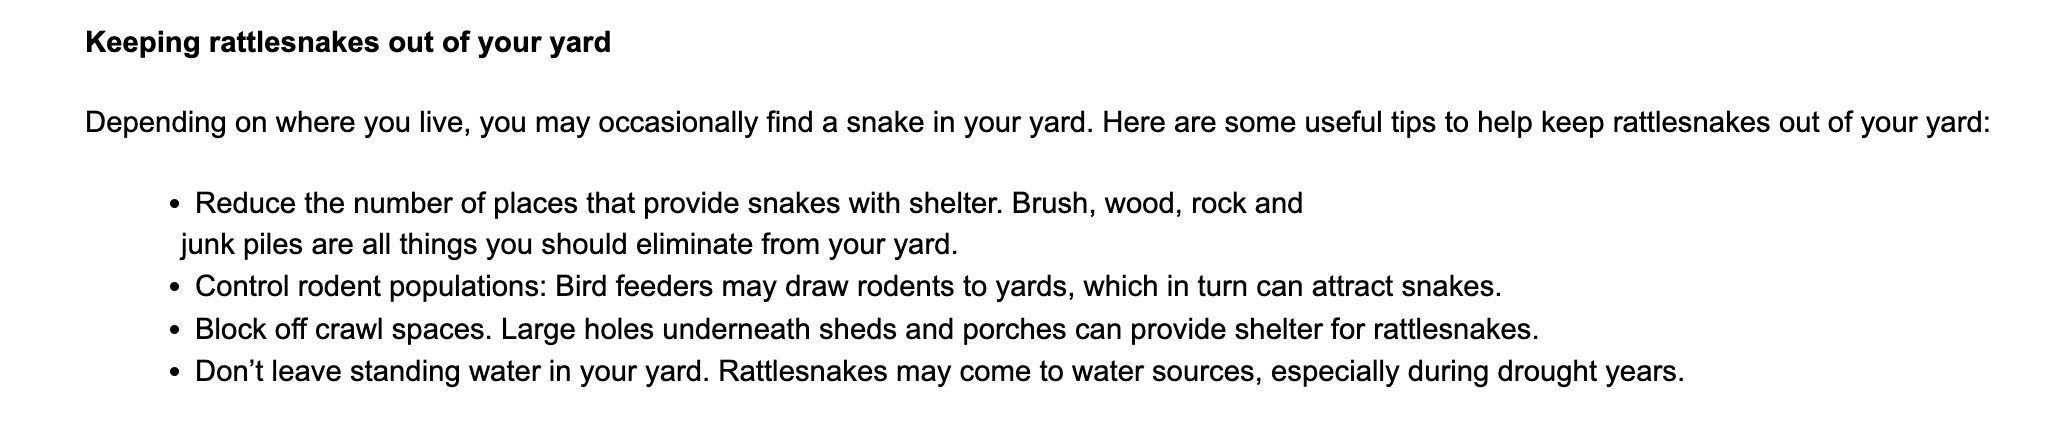 Tips for keeping rattlesnakes out of your yard.